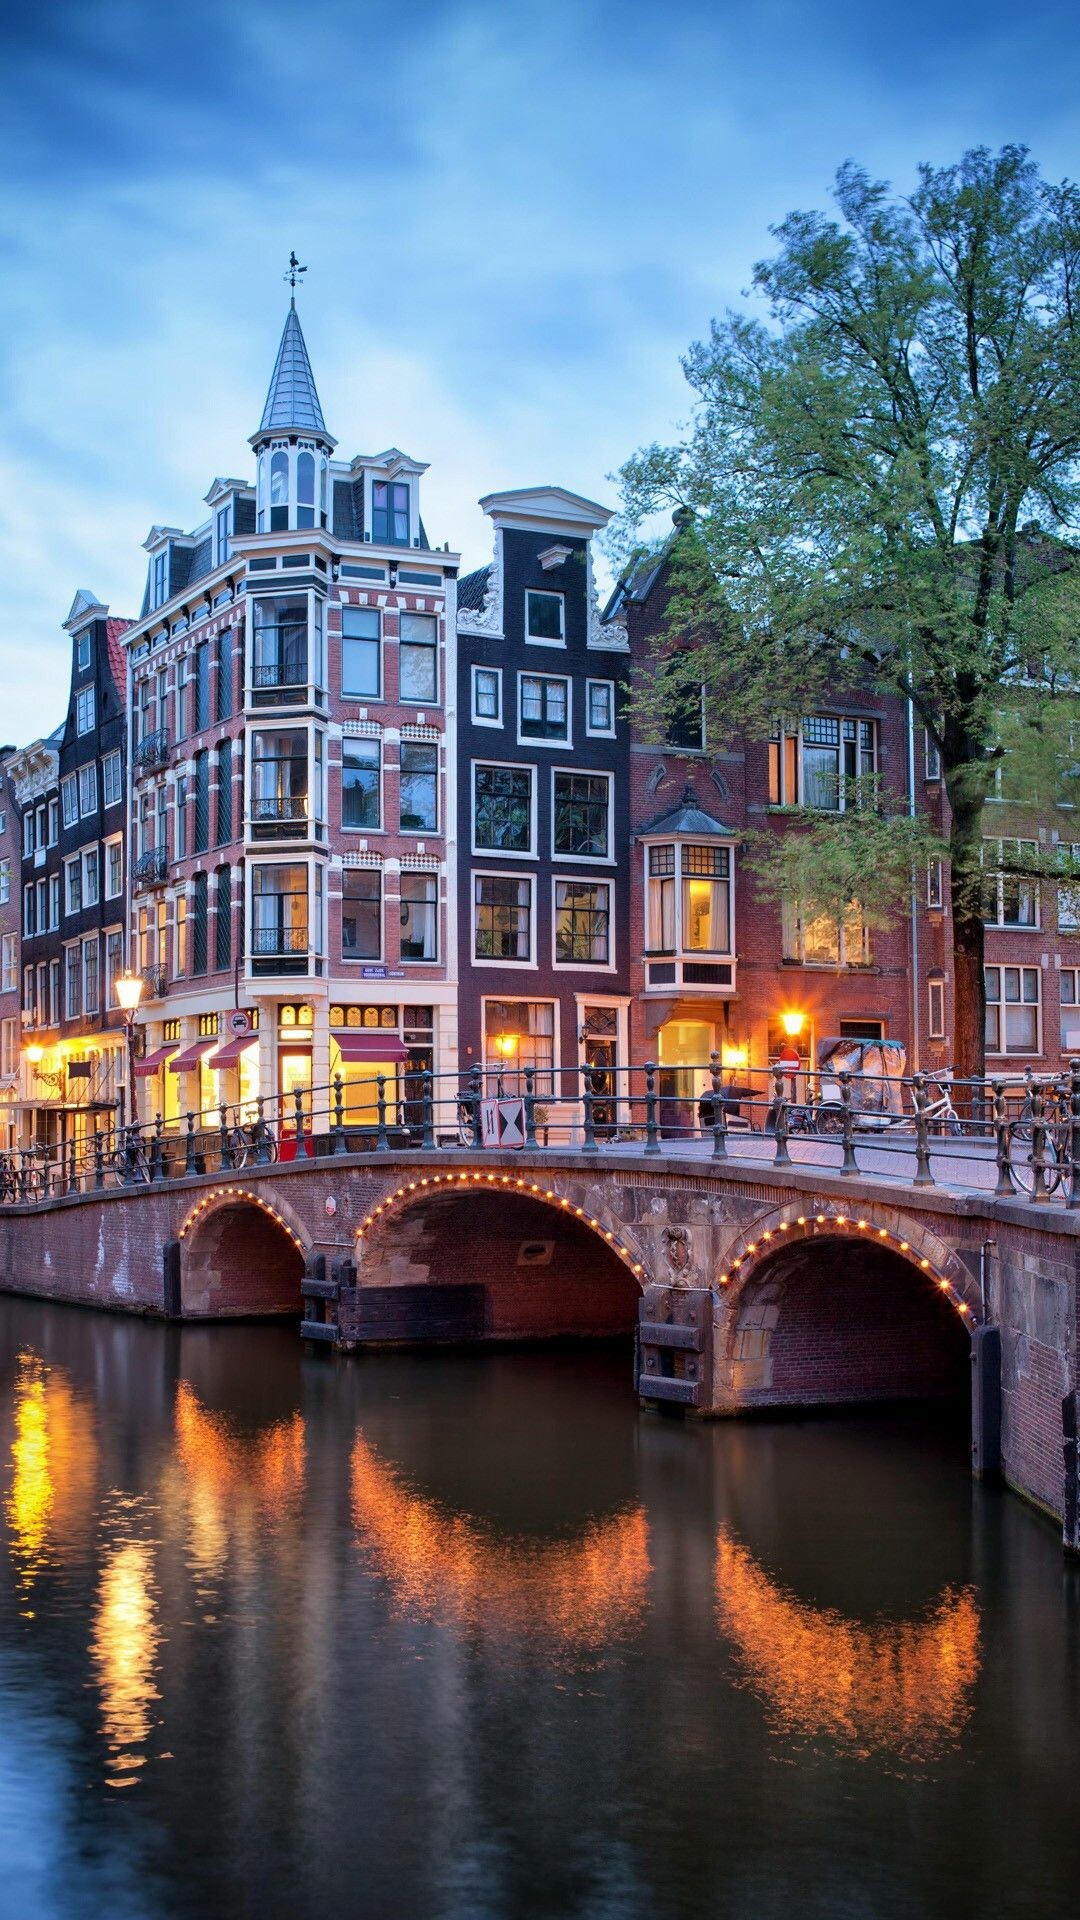 Netherlands: Amsterdam, Known for its artistic heritage, elaborate canal system and narrow houses. 1080x1920 Full HD Background.